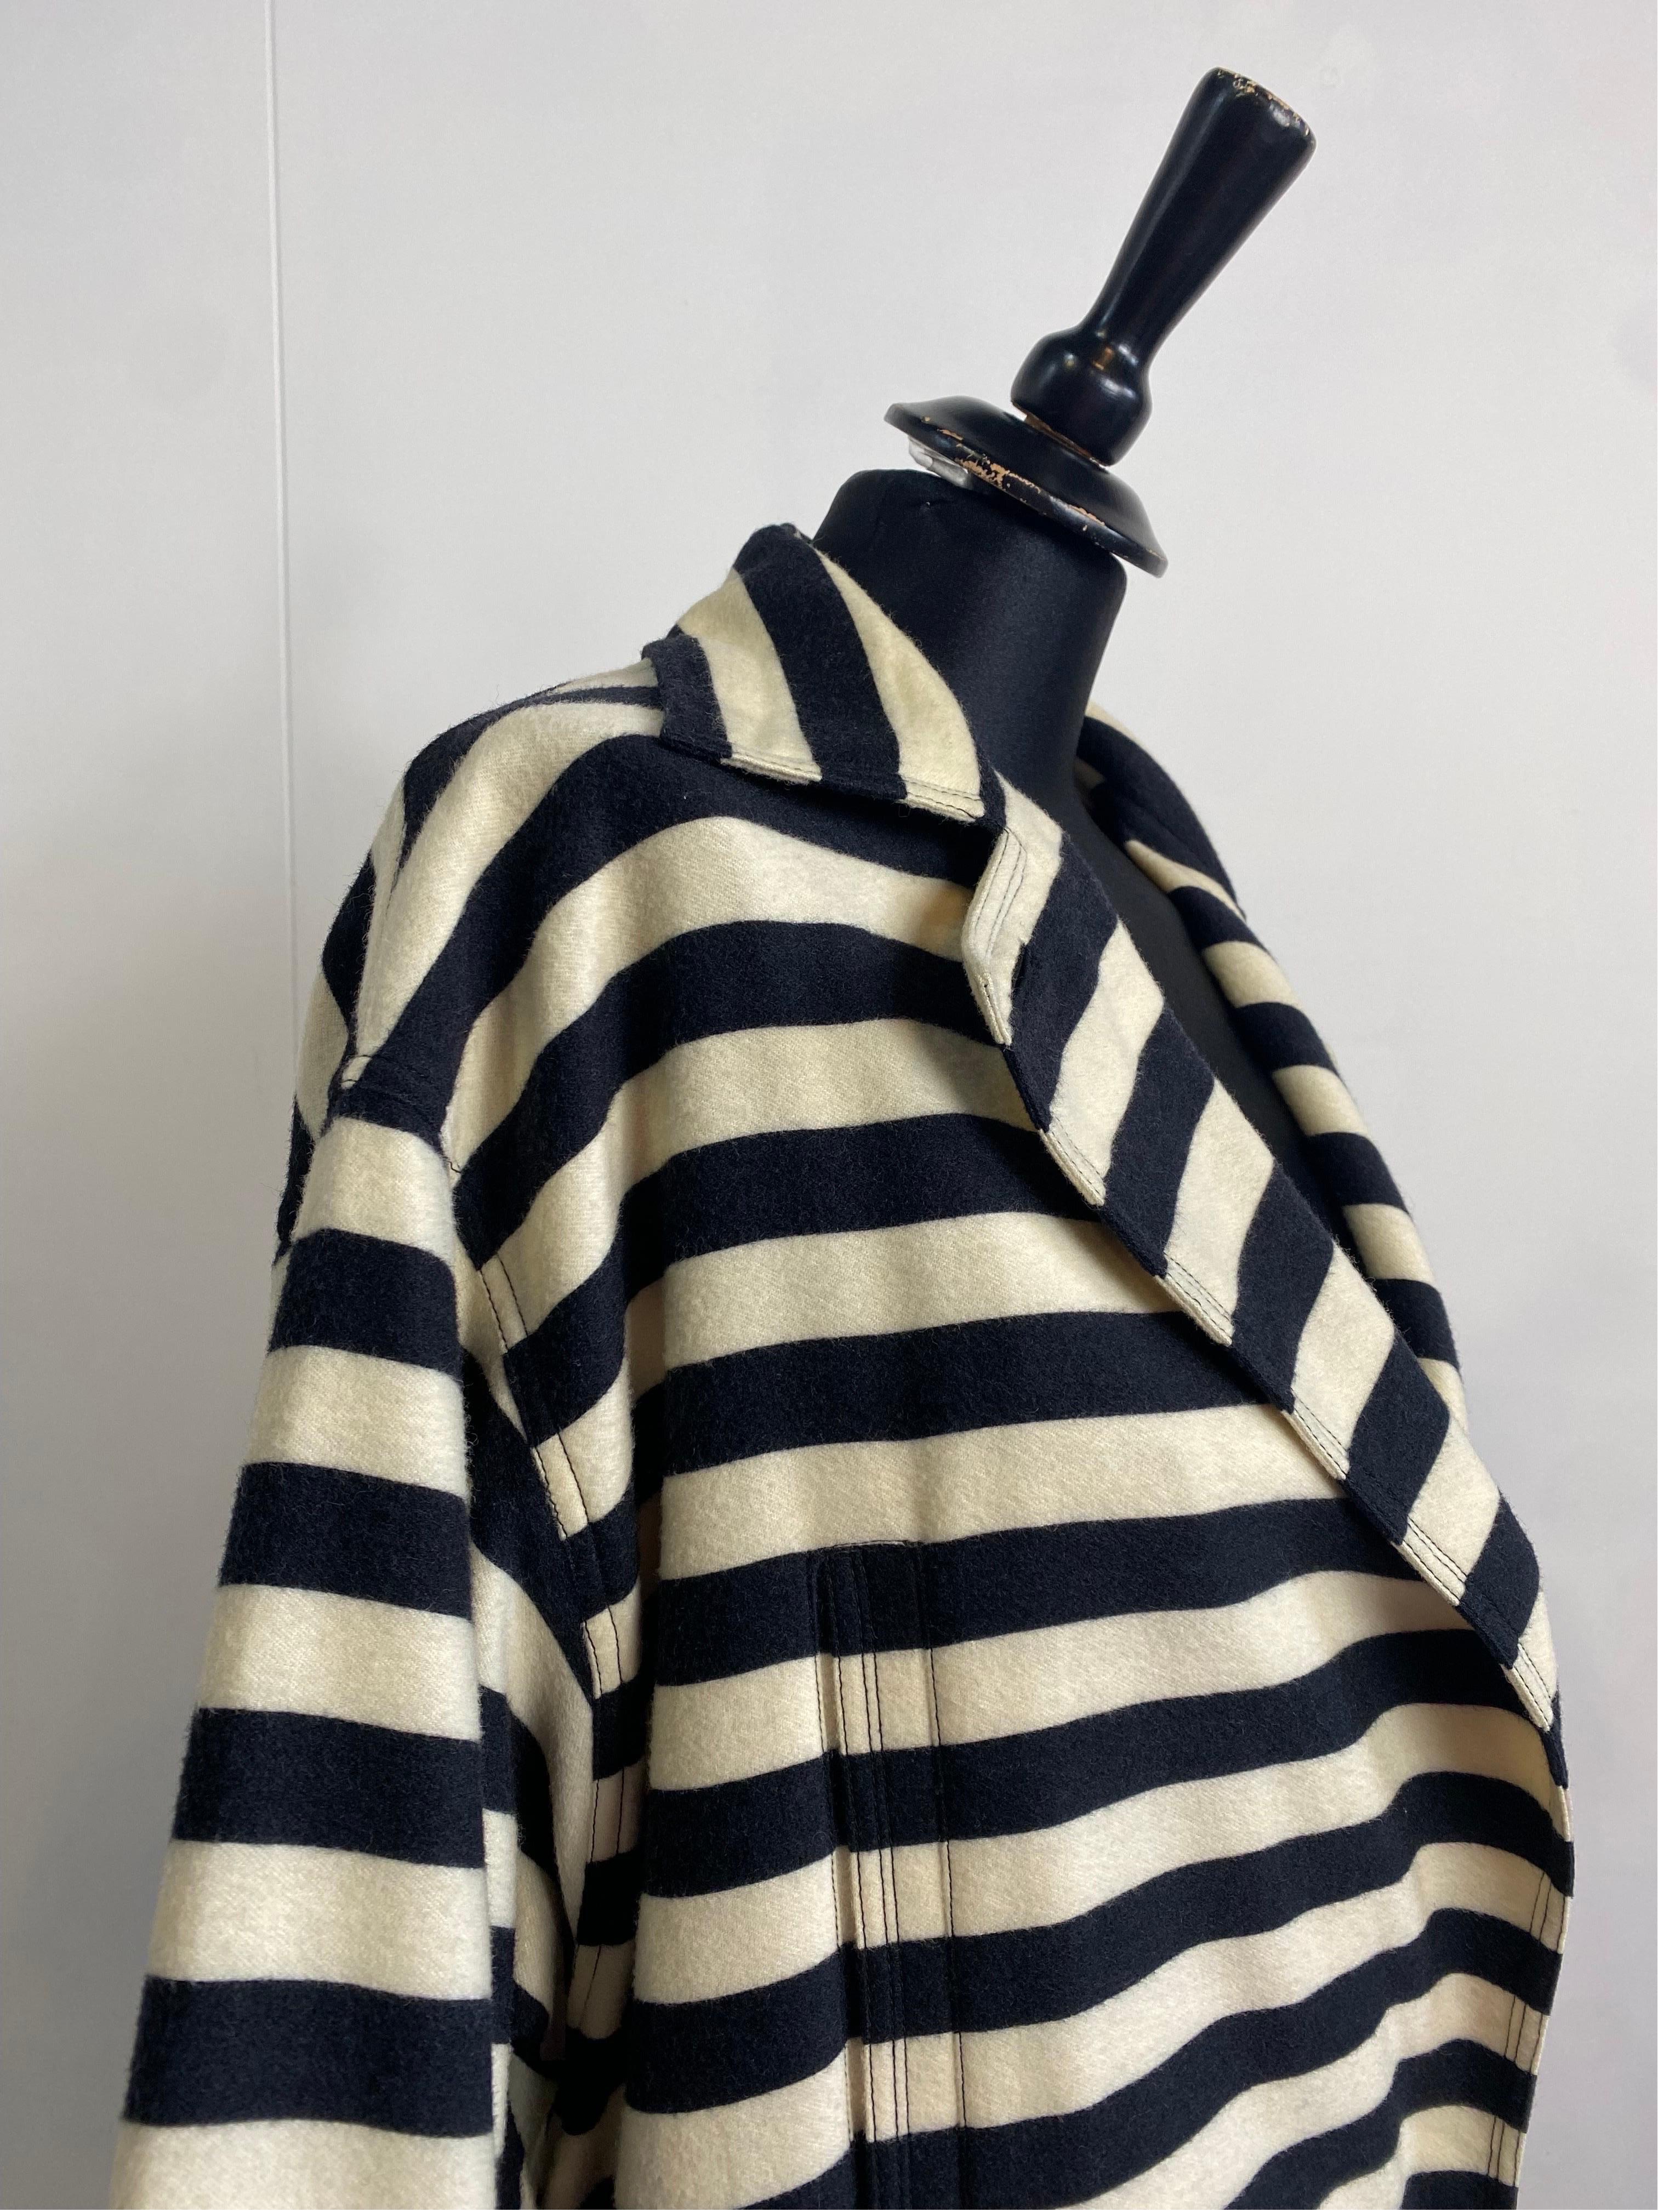 Gianni Versace 90s vintage striped Jacket In Good Condition For Sale In Carnate, IT